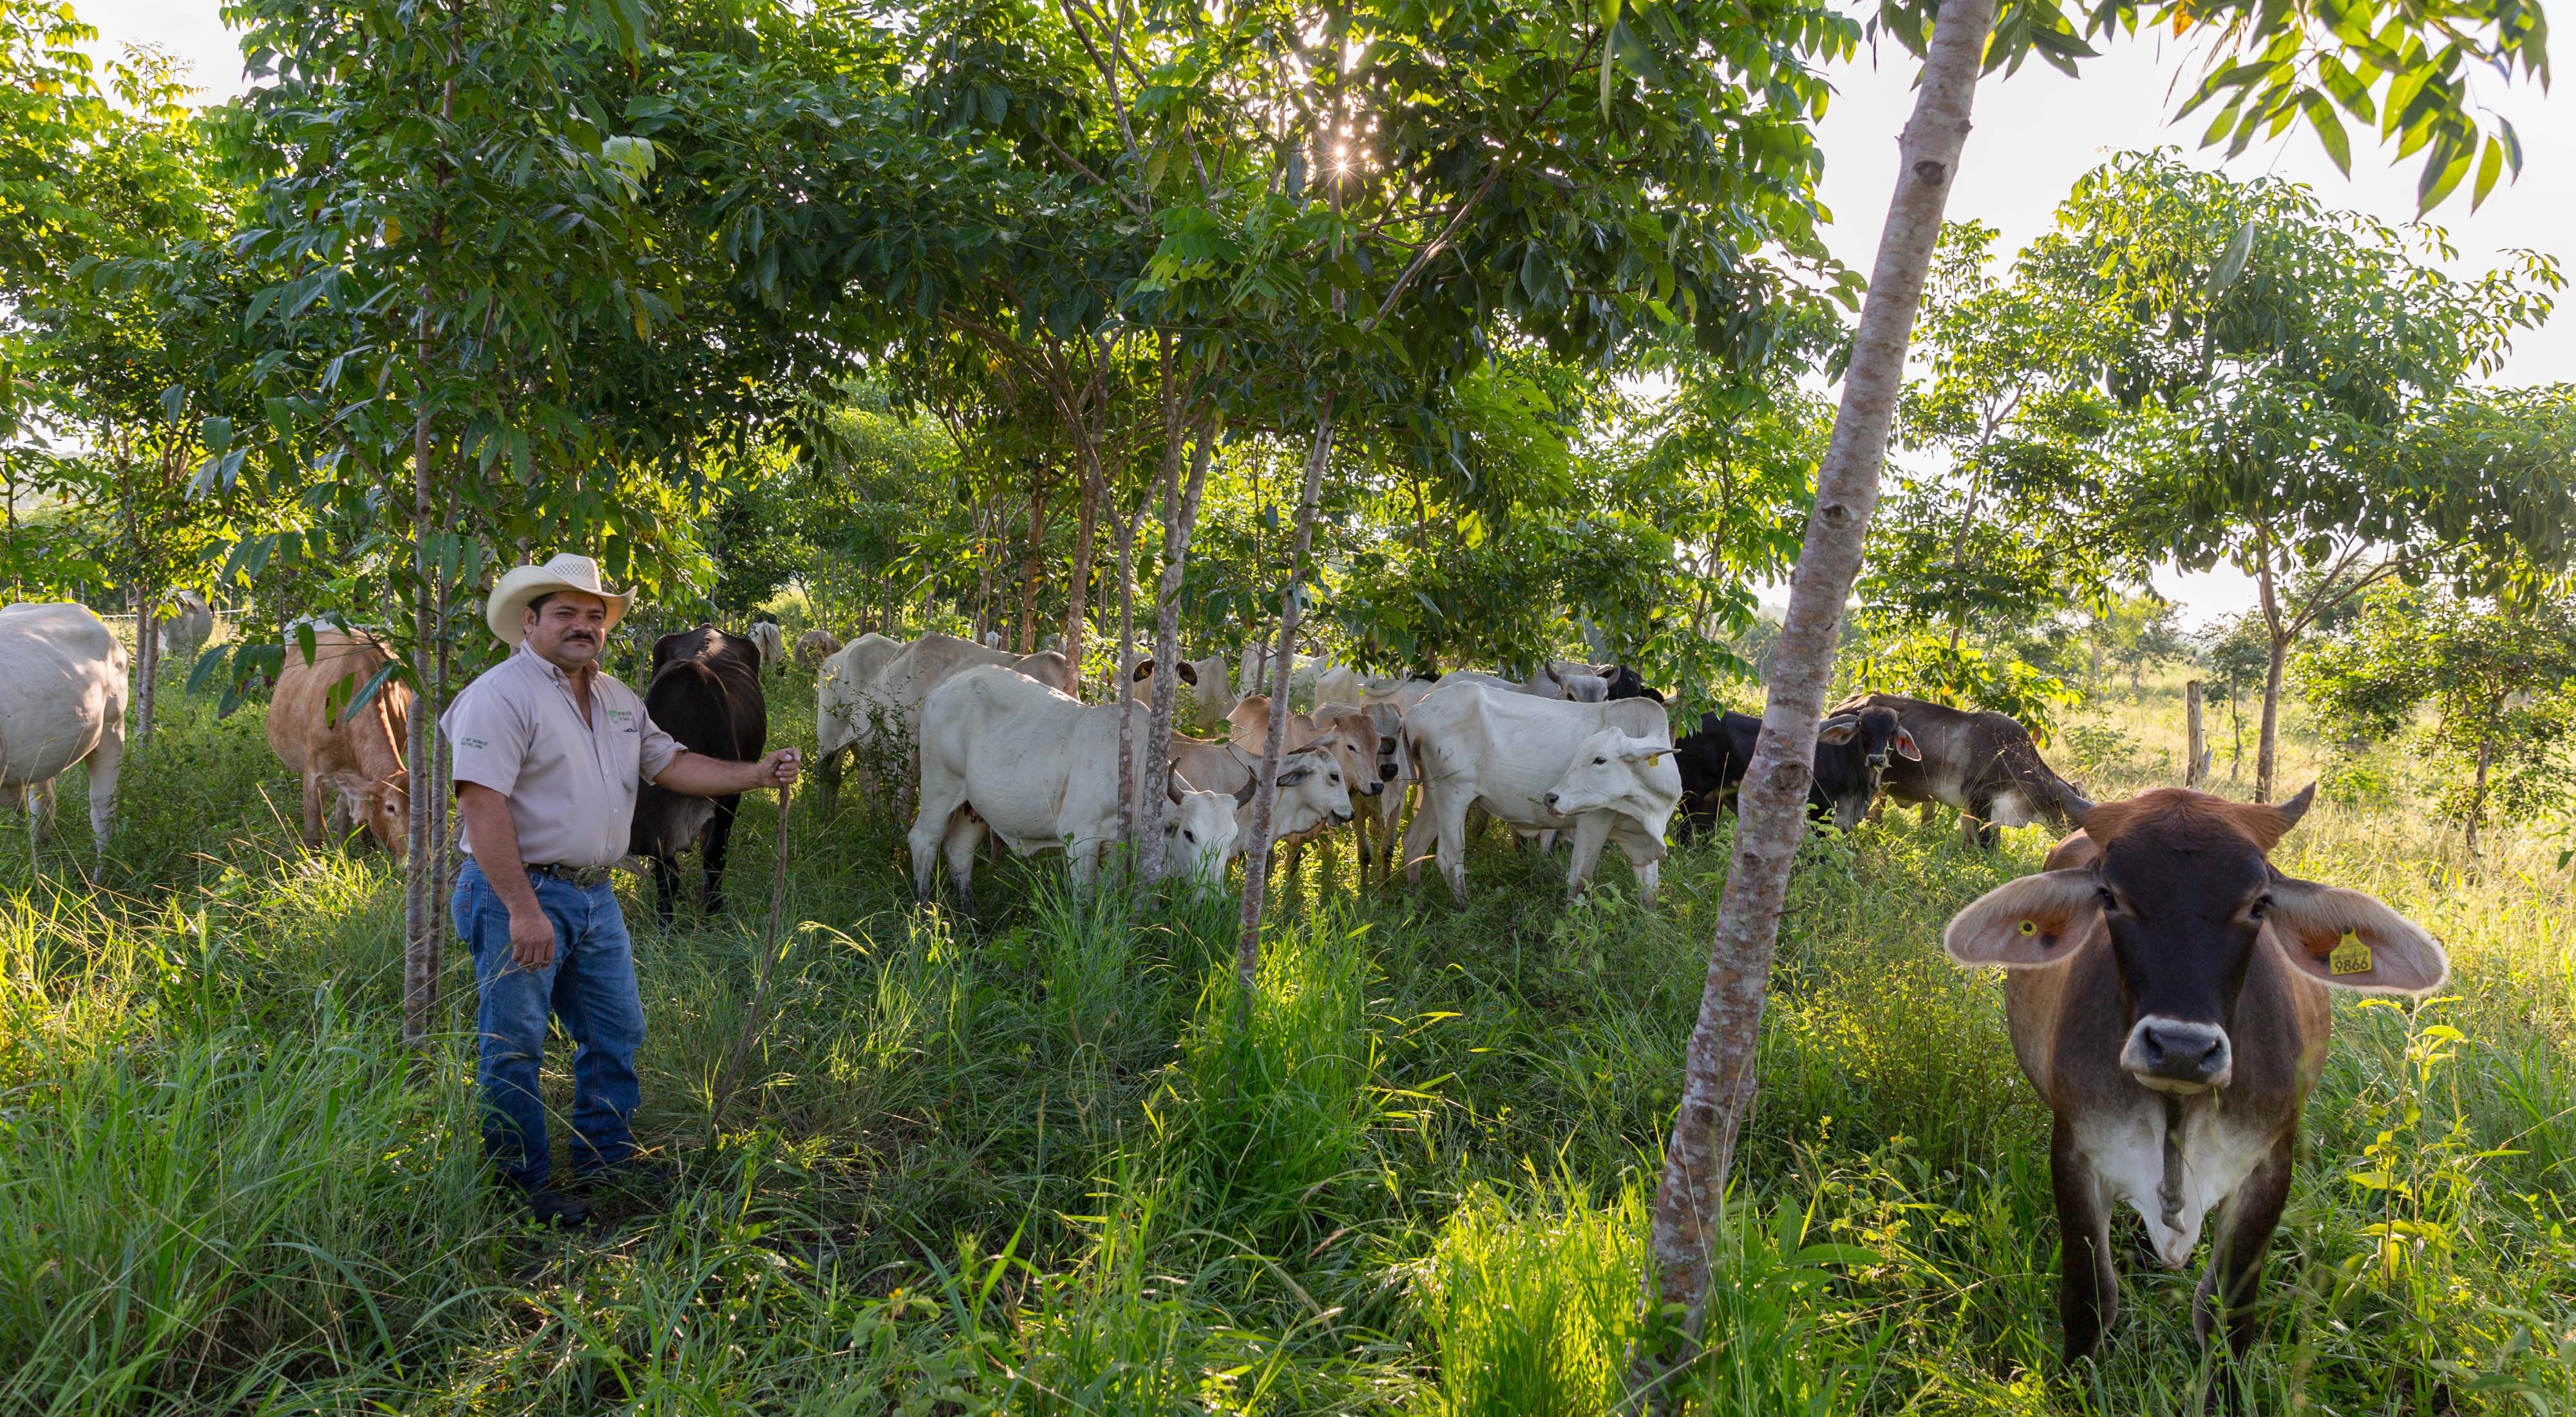 Rancher Jose Palomo stands under the shade trees in his "silvopastoral" pasture at his ranch Los Potrillos in Becanchen, Yucatan, Mexico. Palomo has adopted "silvopastoral" ranching practices, which increases cattle yields through a mixed grass/shrub/tree ecosystem. The shade lessens stress of tropical sun and helps cattle gain and keep weight. The Nature Conservancy works with landowners, communities, and governments in Mexico to promote low-carbon rural development through the design and implementation of improved policy and practice in agriculture, ranching, and forestry. The Conservancy is leading the initiative, Mexico REDD+ Program in conjunction with the Rainforest Alliance, the Woods Hole Research Center, and Espacios Naturales y Desarrollo Sustentable. 